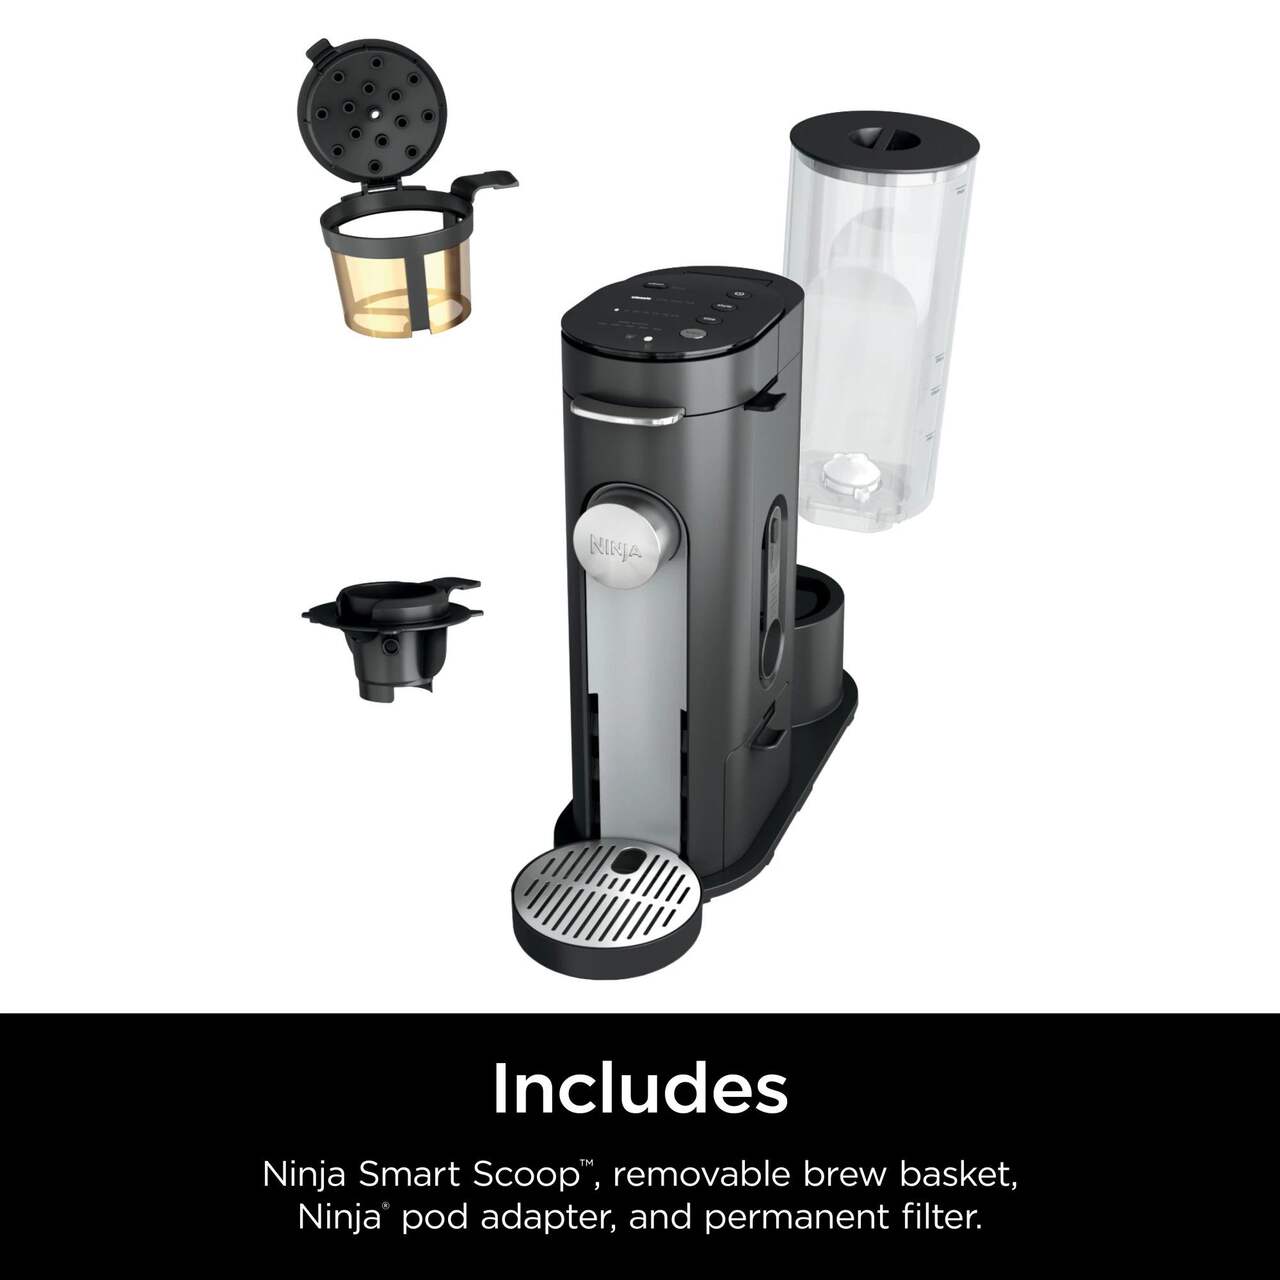 https://media-www.canadiantire.ca/product/living/kitchen/kitchen-appliances/0430322/ninja-single-serve-dual-brew-coffee-maker-grounds-pods-51a6f864-5c5f-4de4-ae4d-2cb608004425-jpgrendition.jpg?imdensity=1&imwidth=1244&impolicy=mZoom